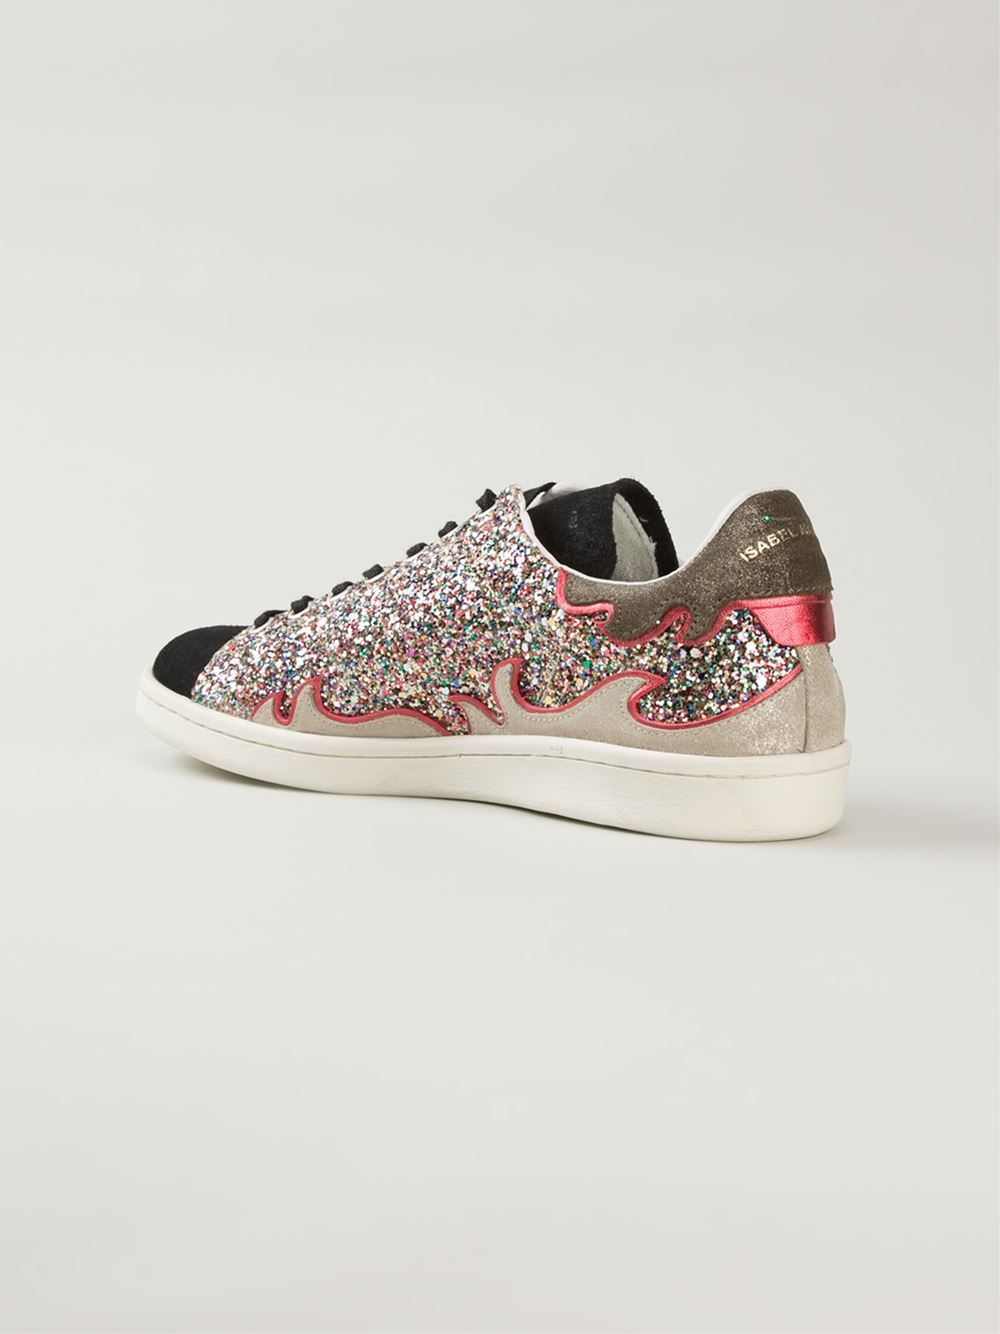 Isabel Marant Leather Gilly Glitter Sneakers - Lyst